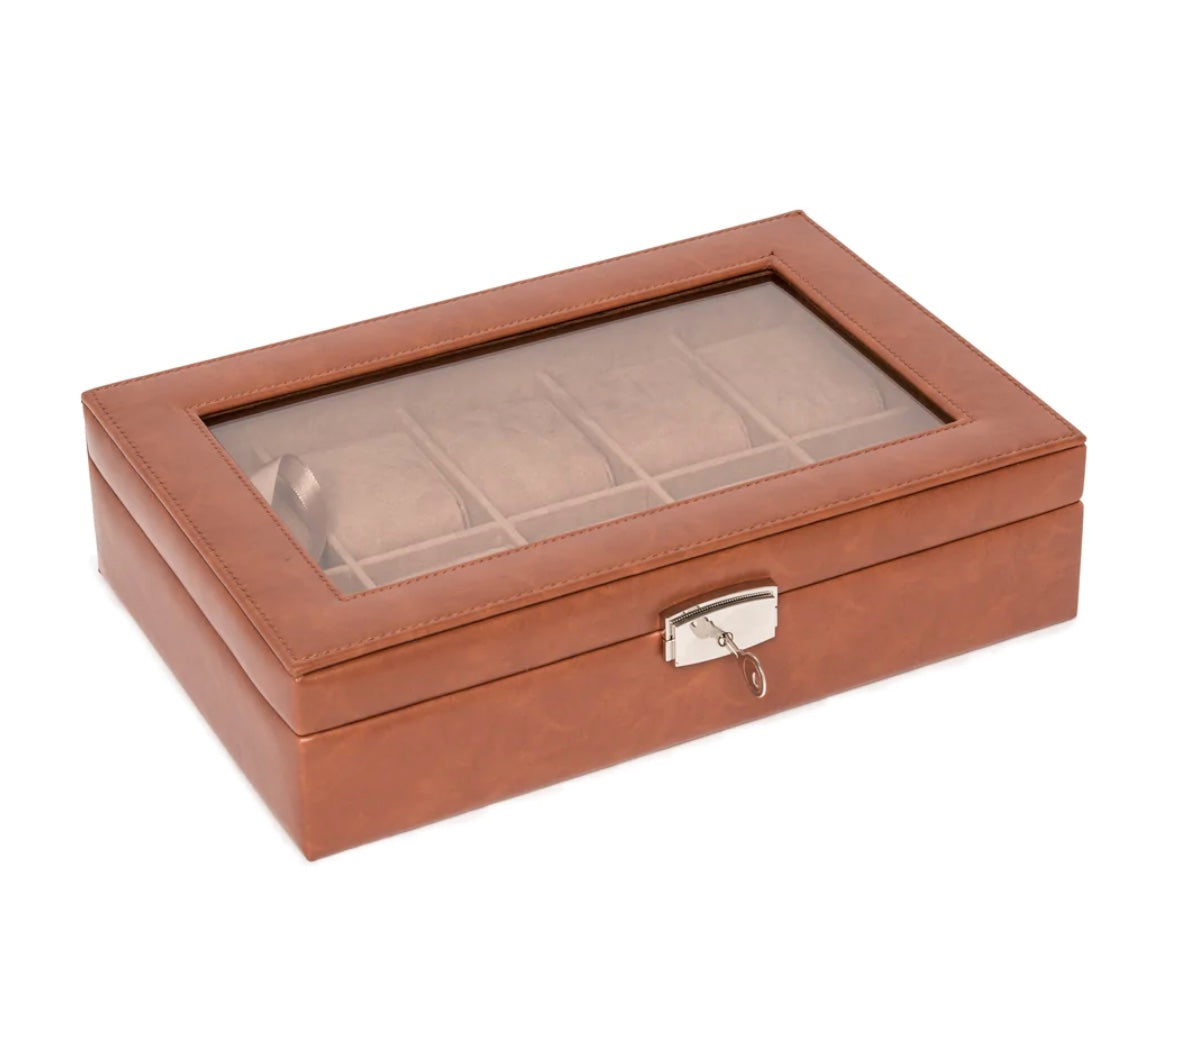 VEGAN LEATHER & WOOD WATCH BOX 10-SLOT WITH GLASS LID AND LOCK